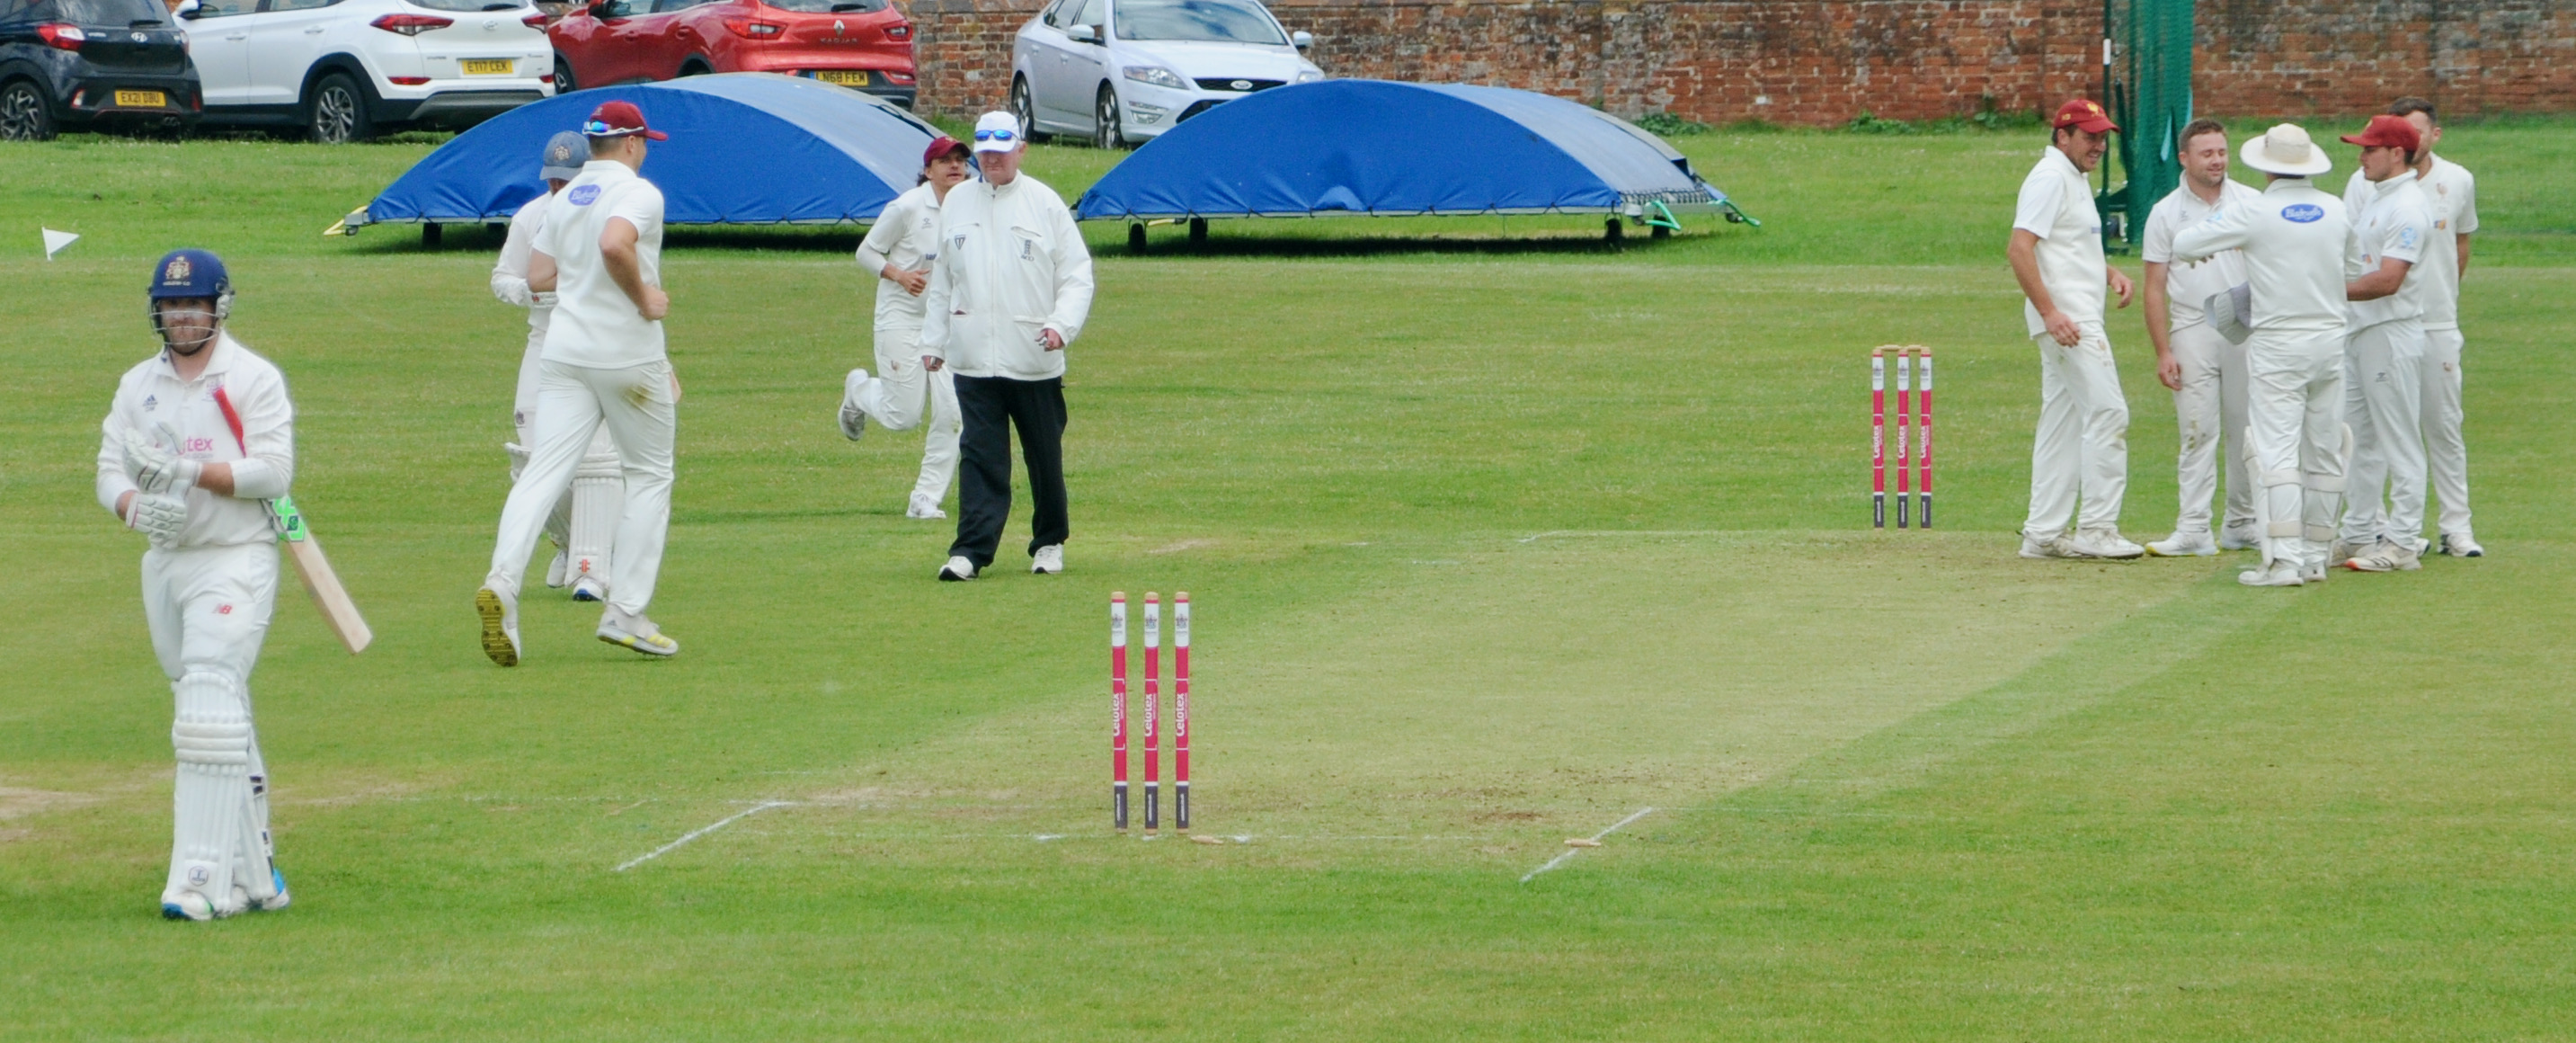 Action from Hadleigh cricket (Picture credit: Nub News)